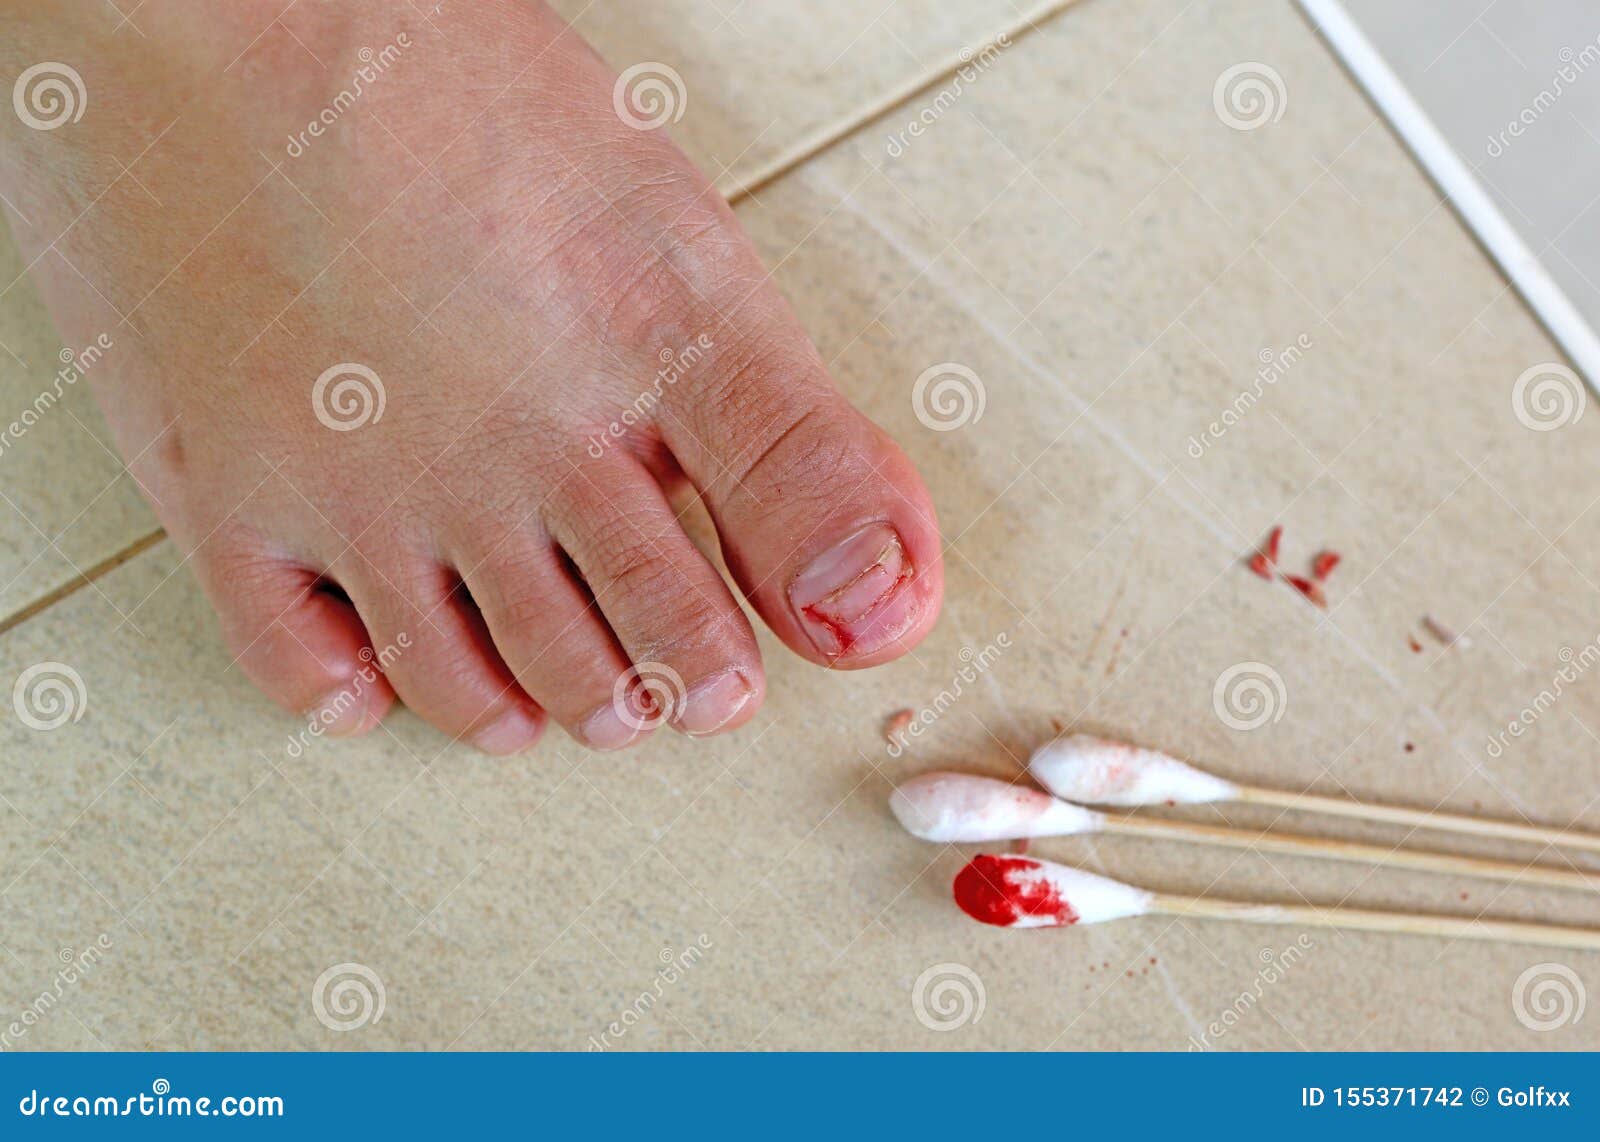 1. How to Create a Black Toe Nail Design for an Injured Toe - wide 5